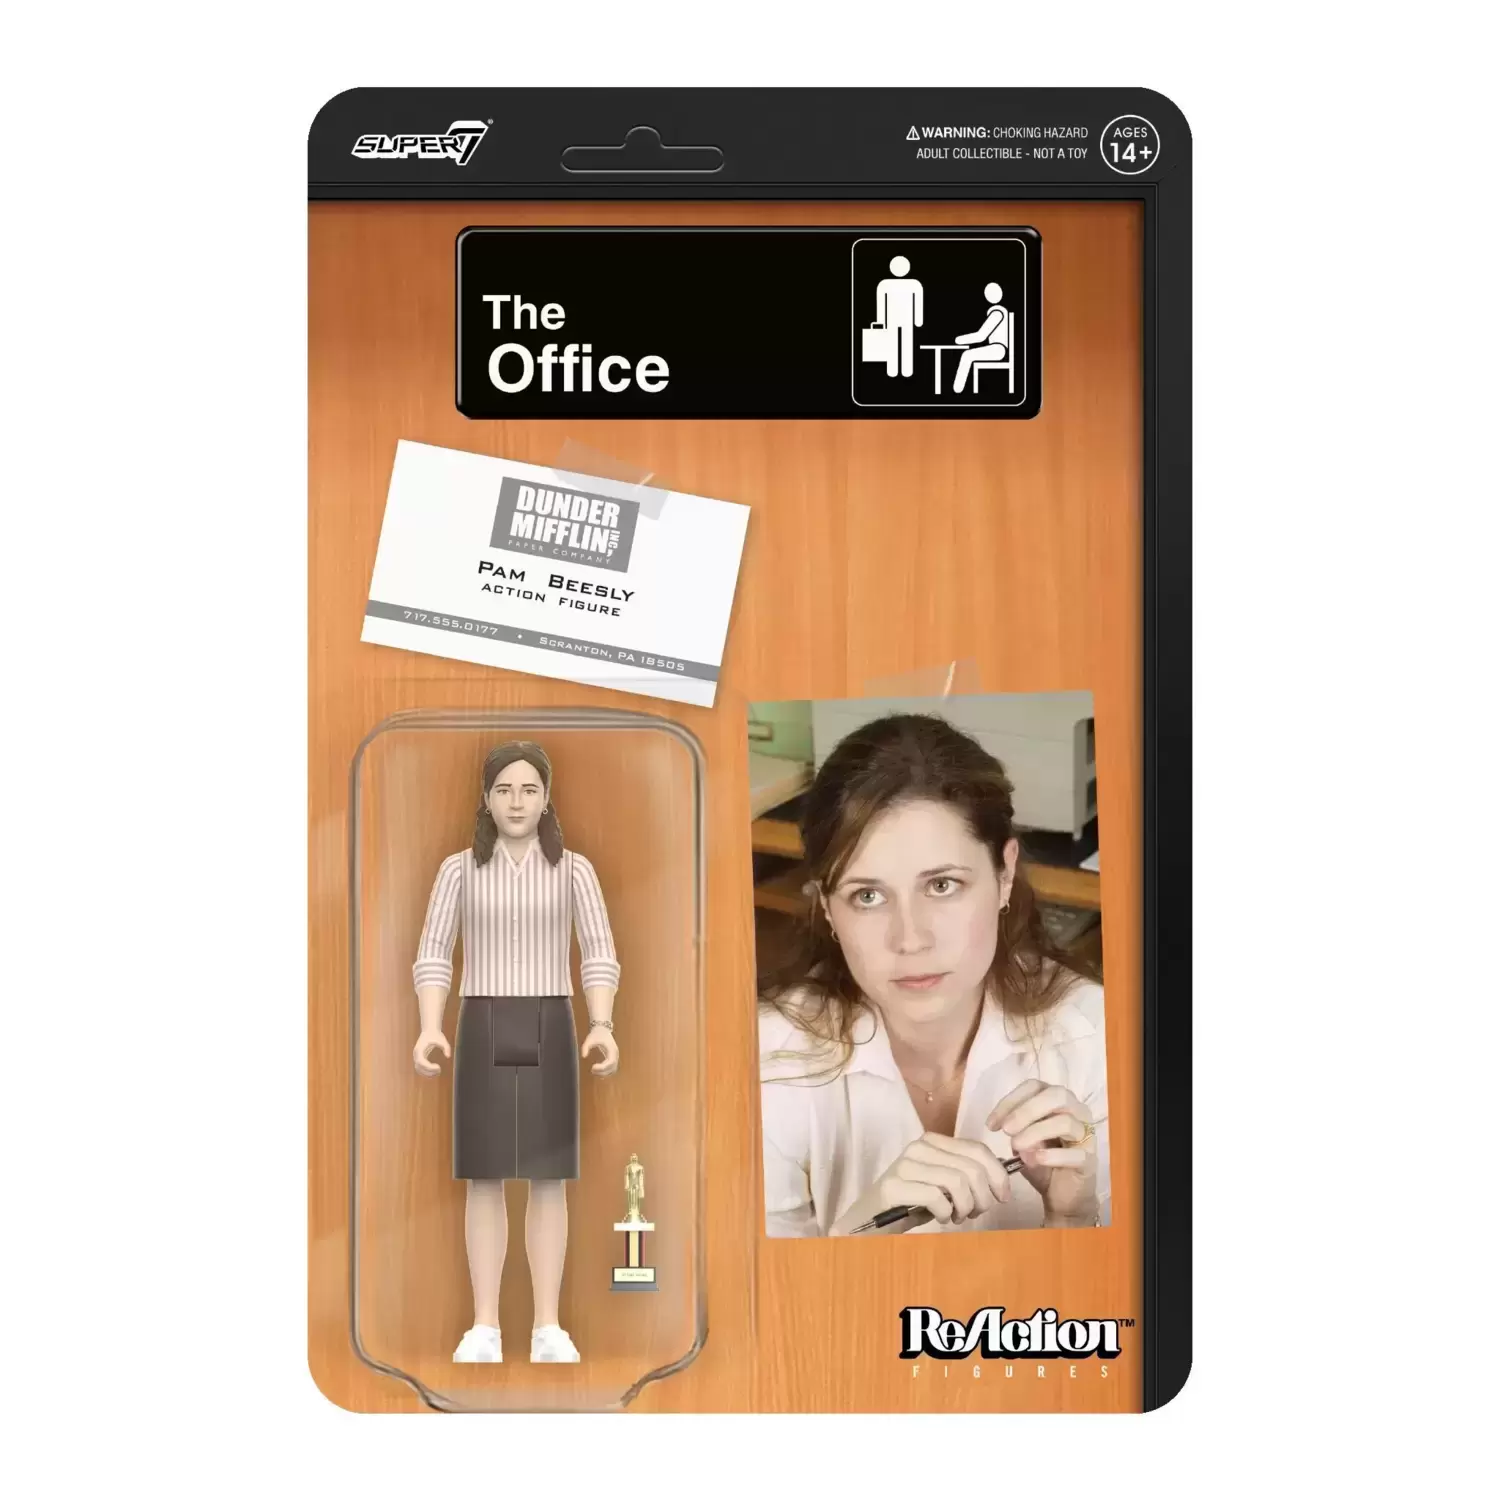 ReAction Figures - The Office - Pam Beesly (Dundie)